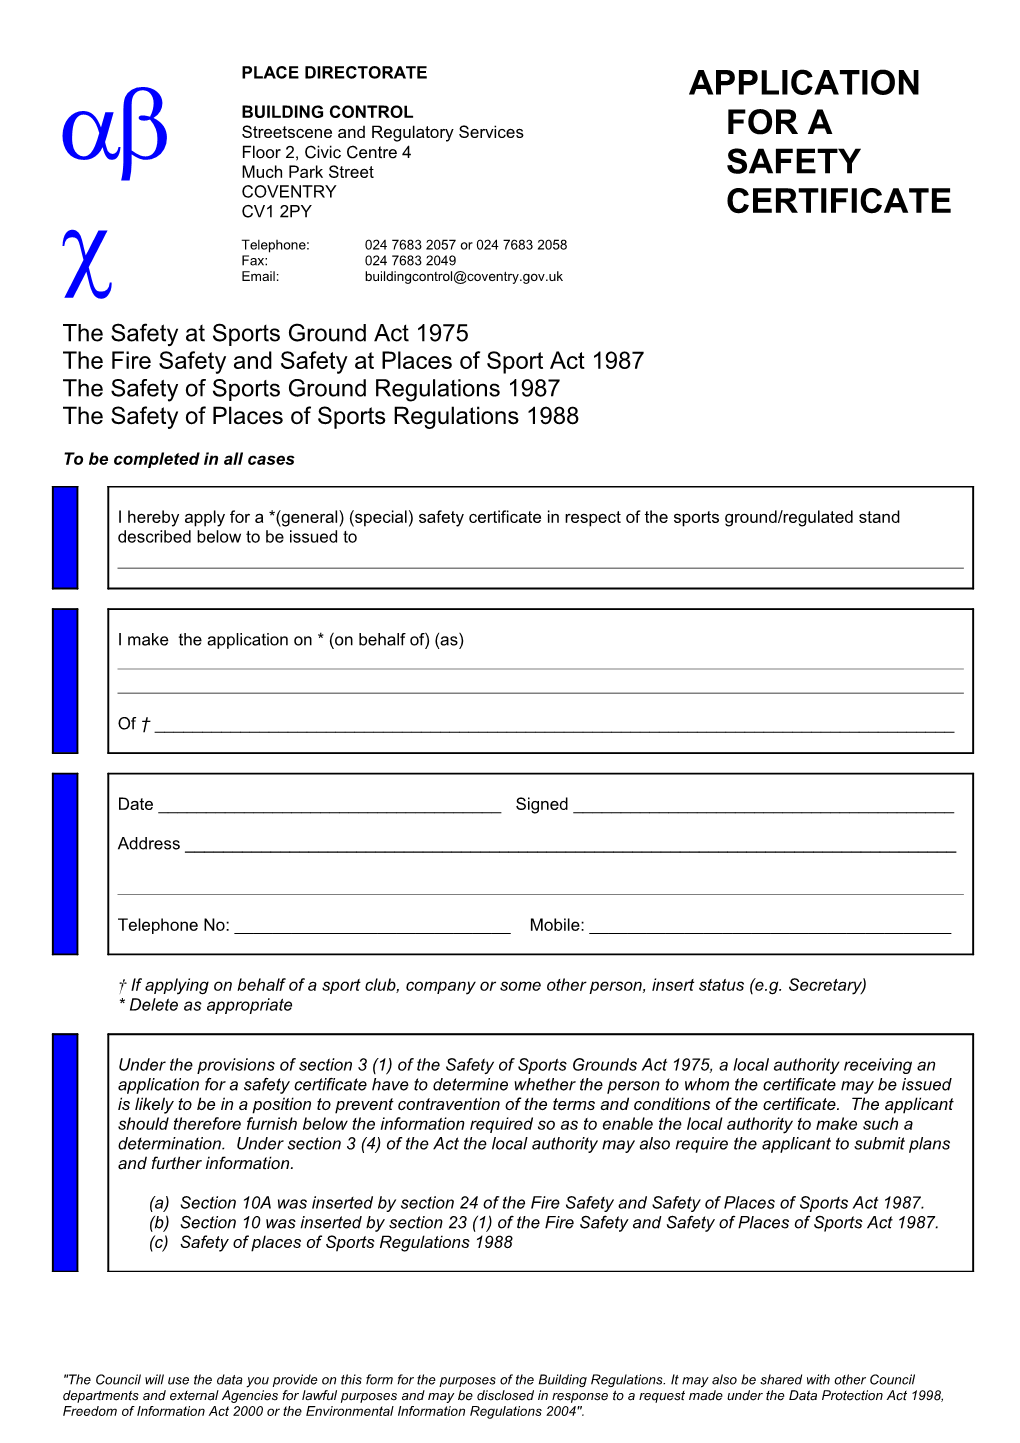 Application for a Safety Certificate